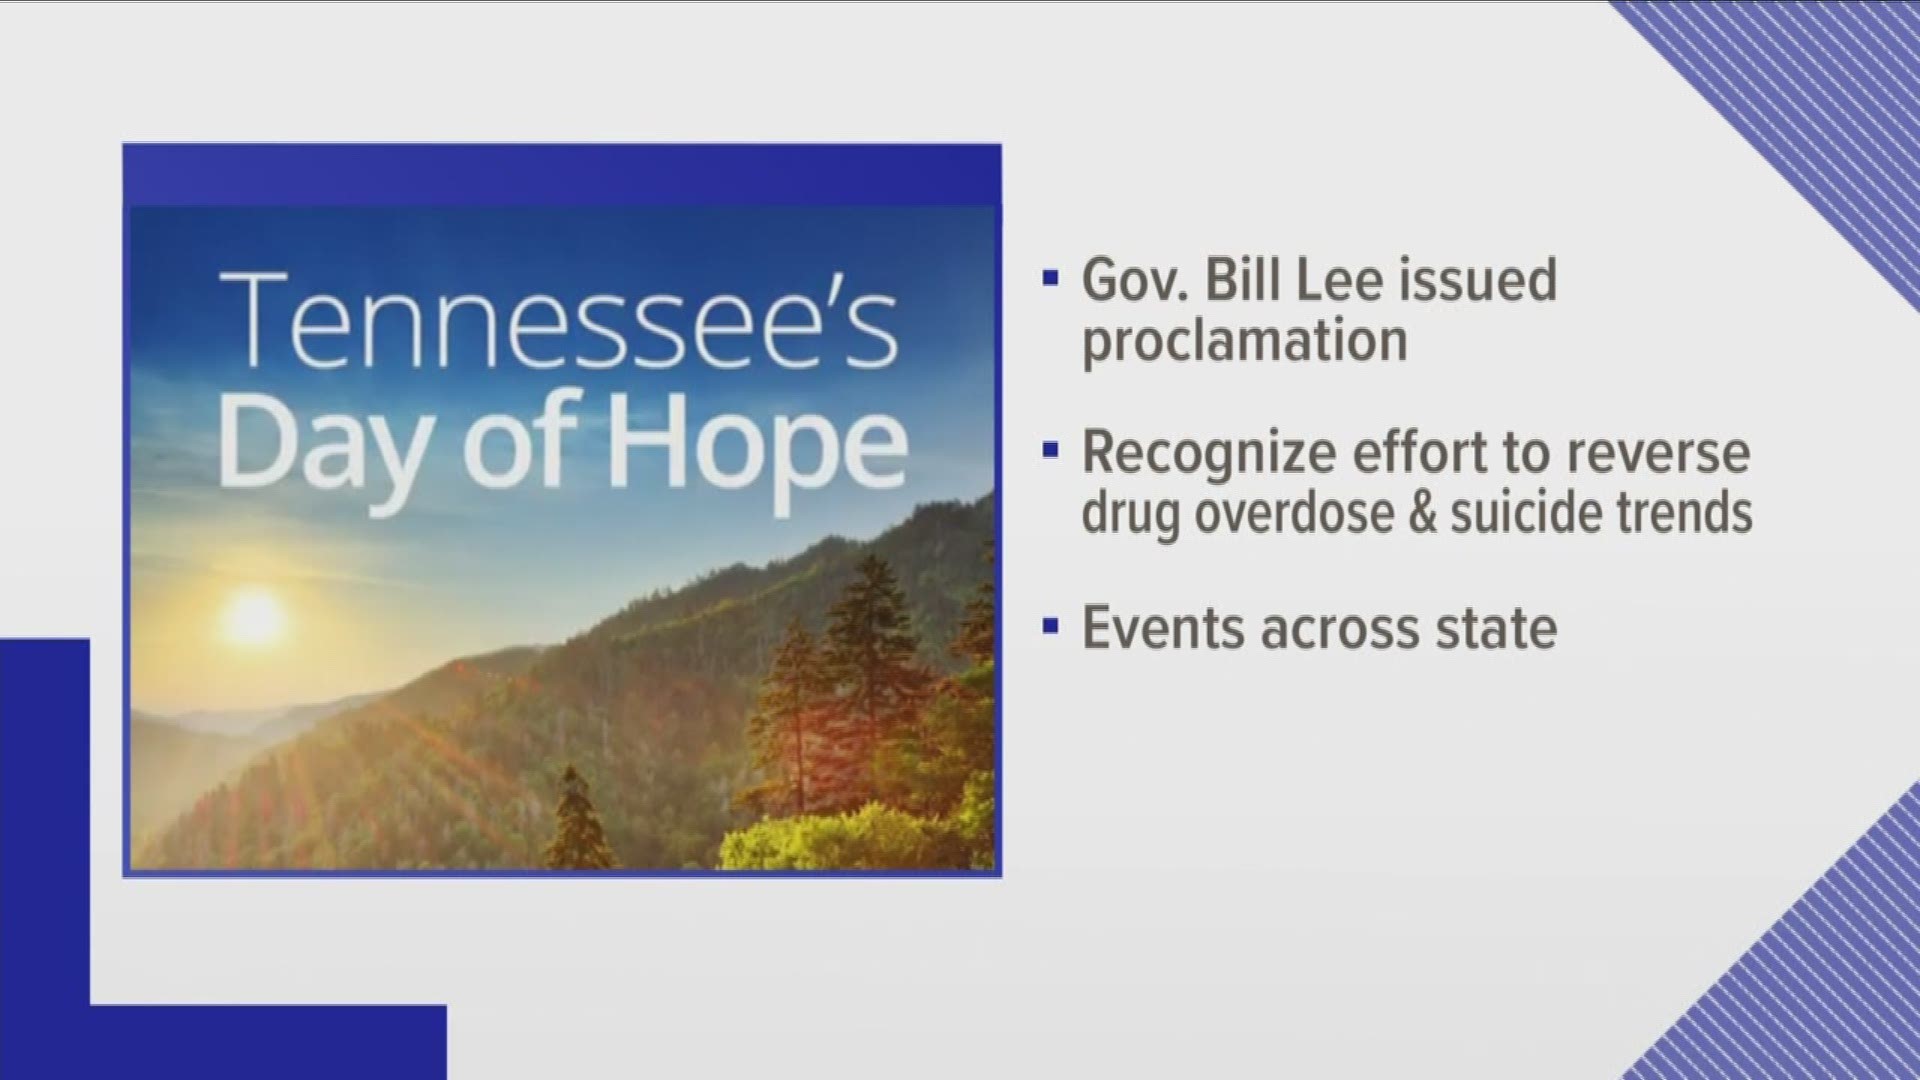 Governor Bill Lee made the proclamation to recognize how people are trying to reverse the trends of drug overdoses and suicides.